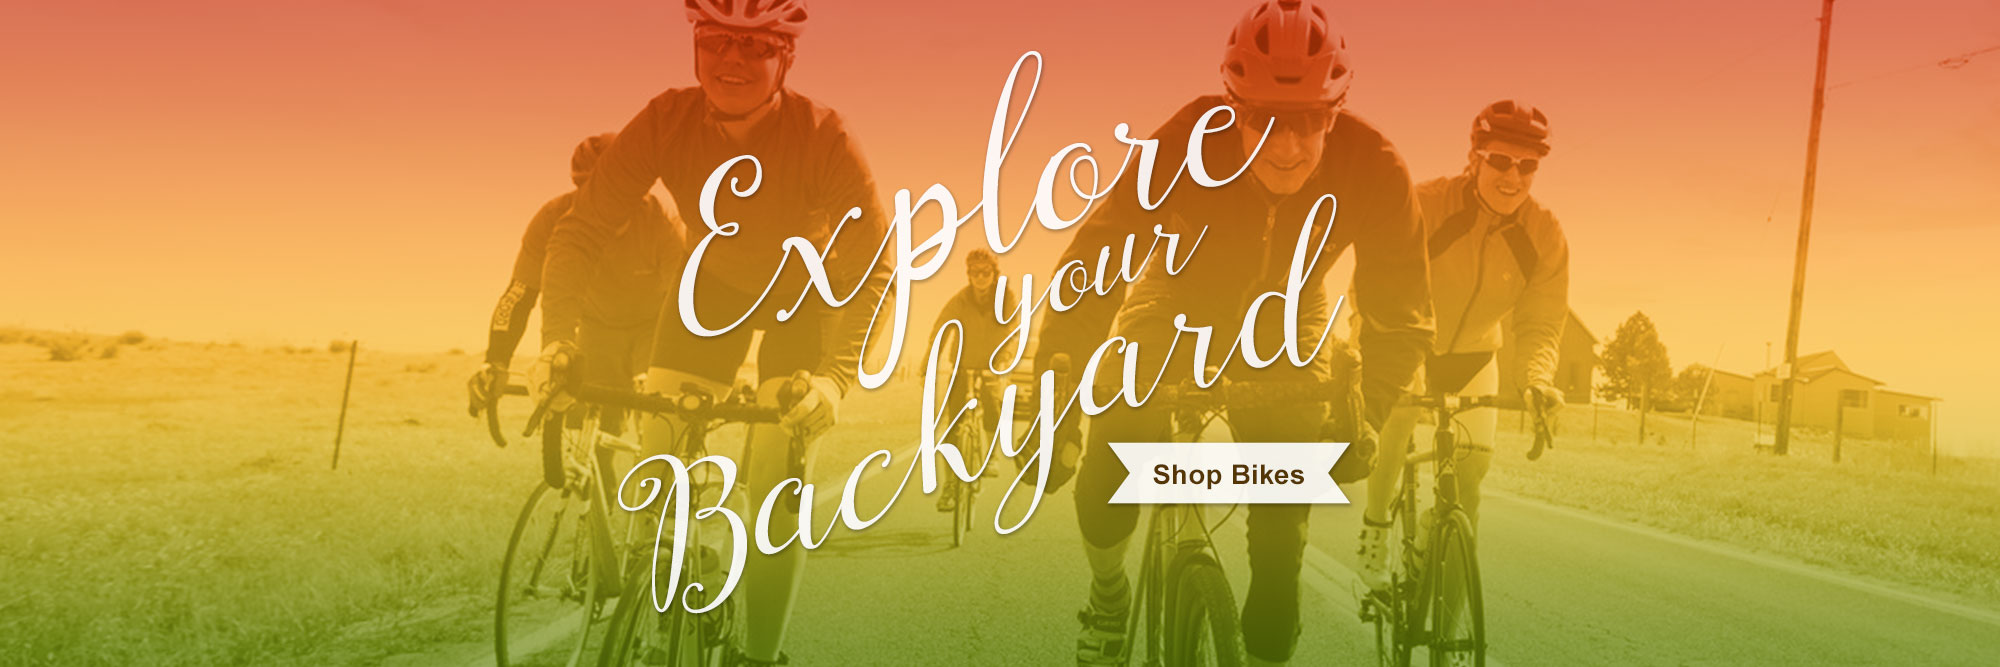 Shop our wide selection of bikes